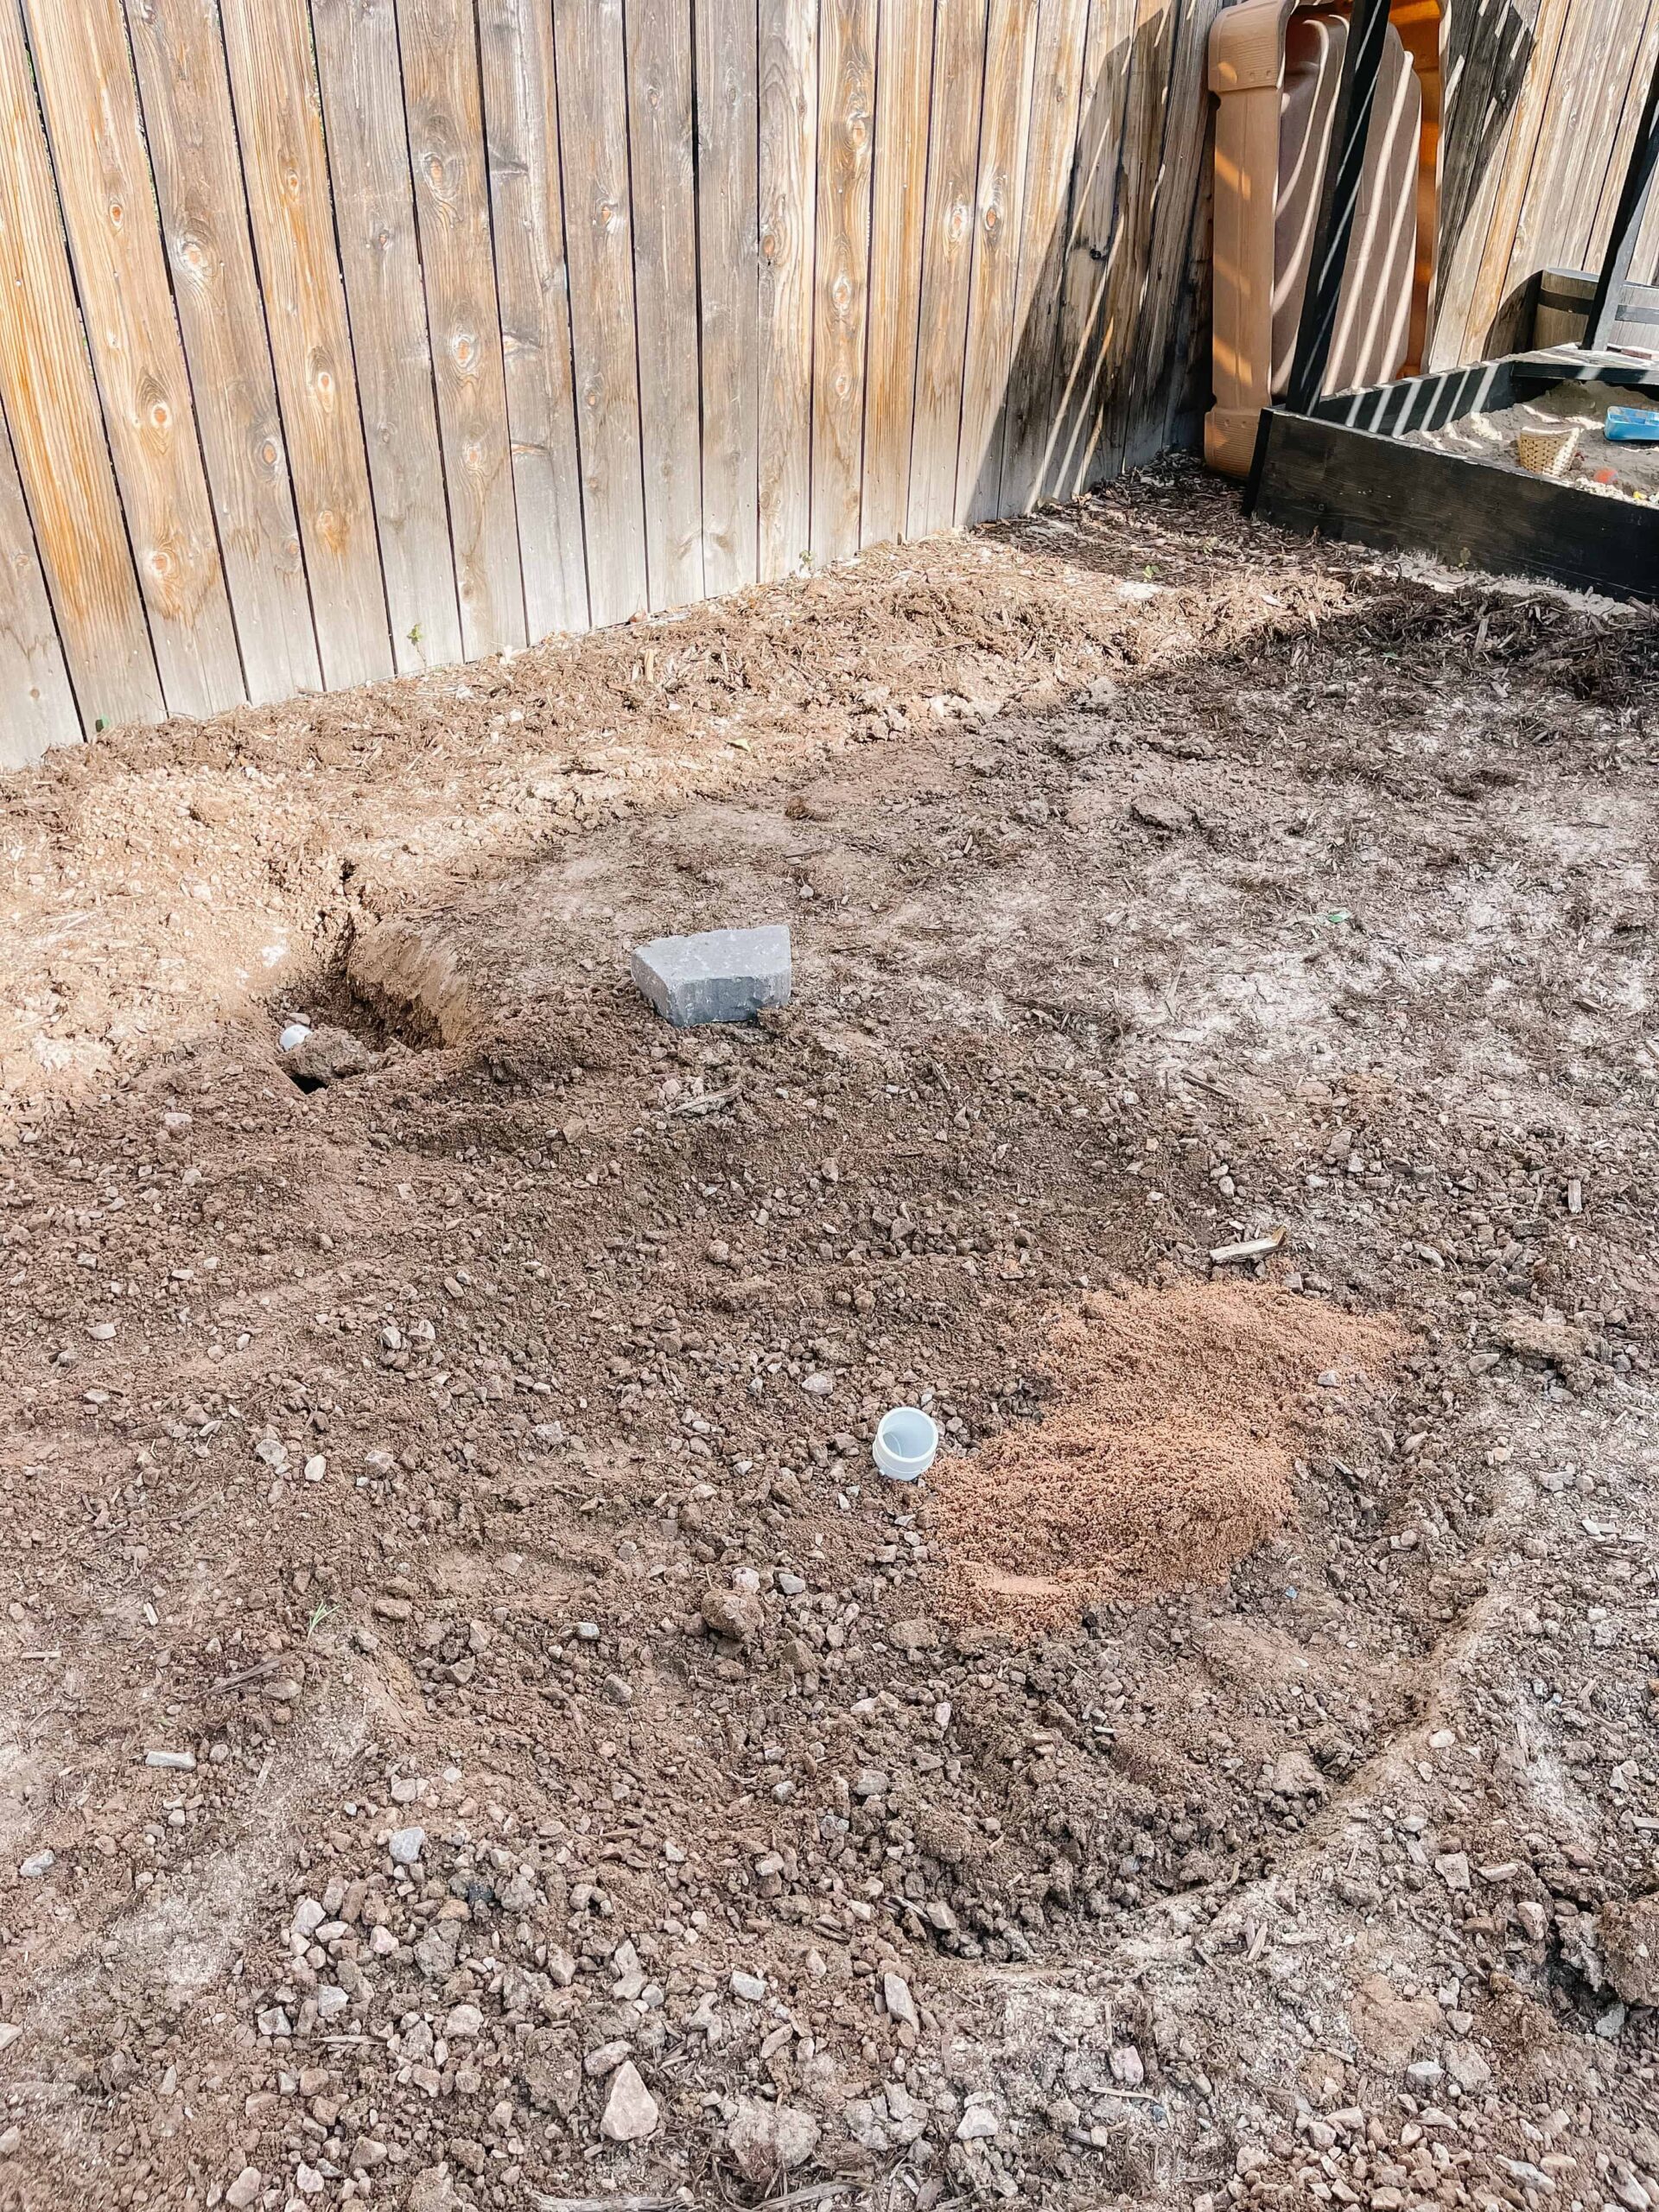 DIY Propane Fire Pit - Dig Trench for Propane Tubing and Fill